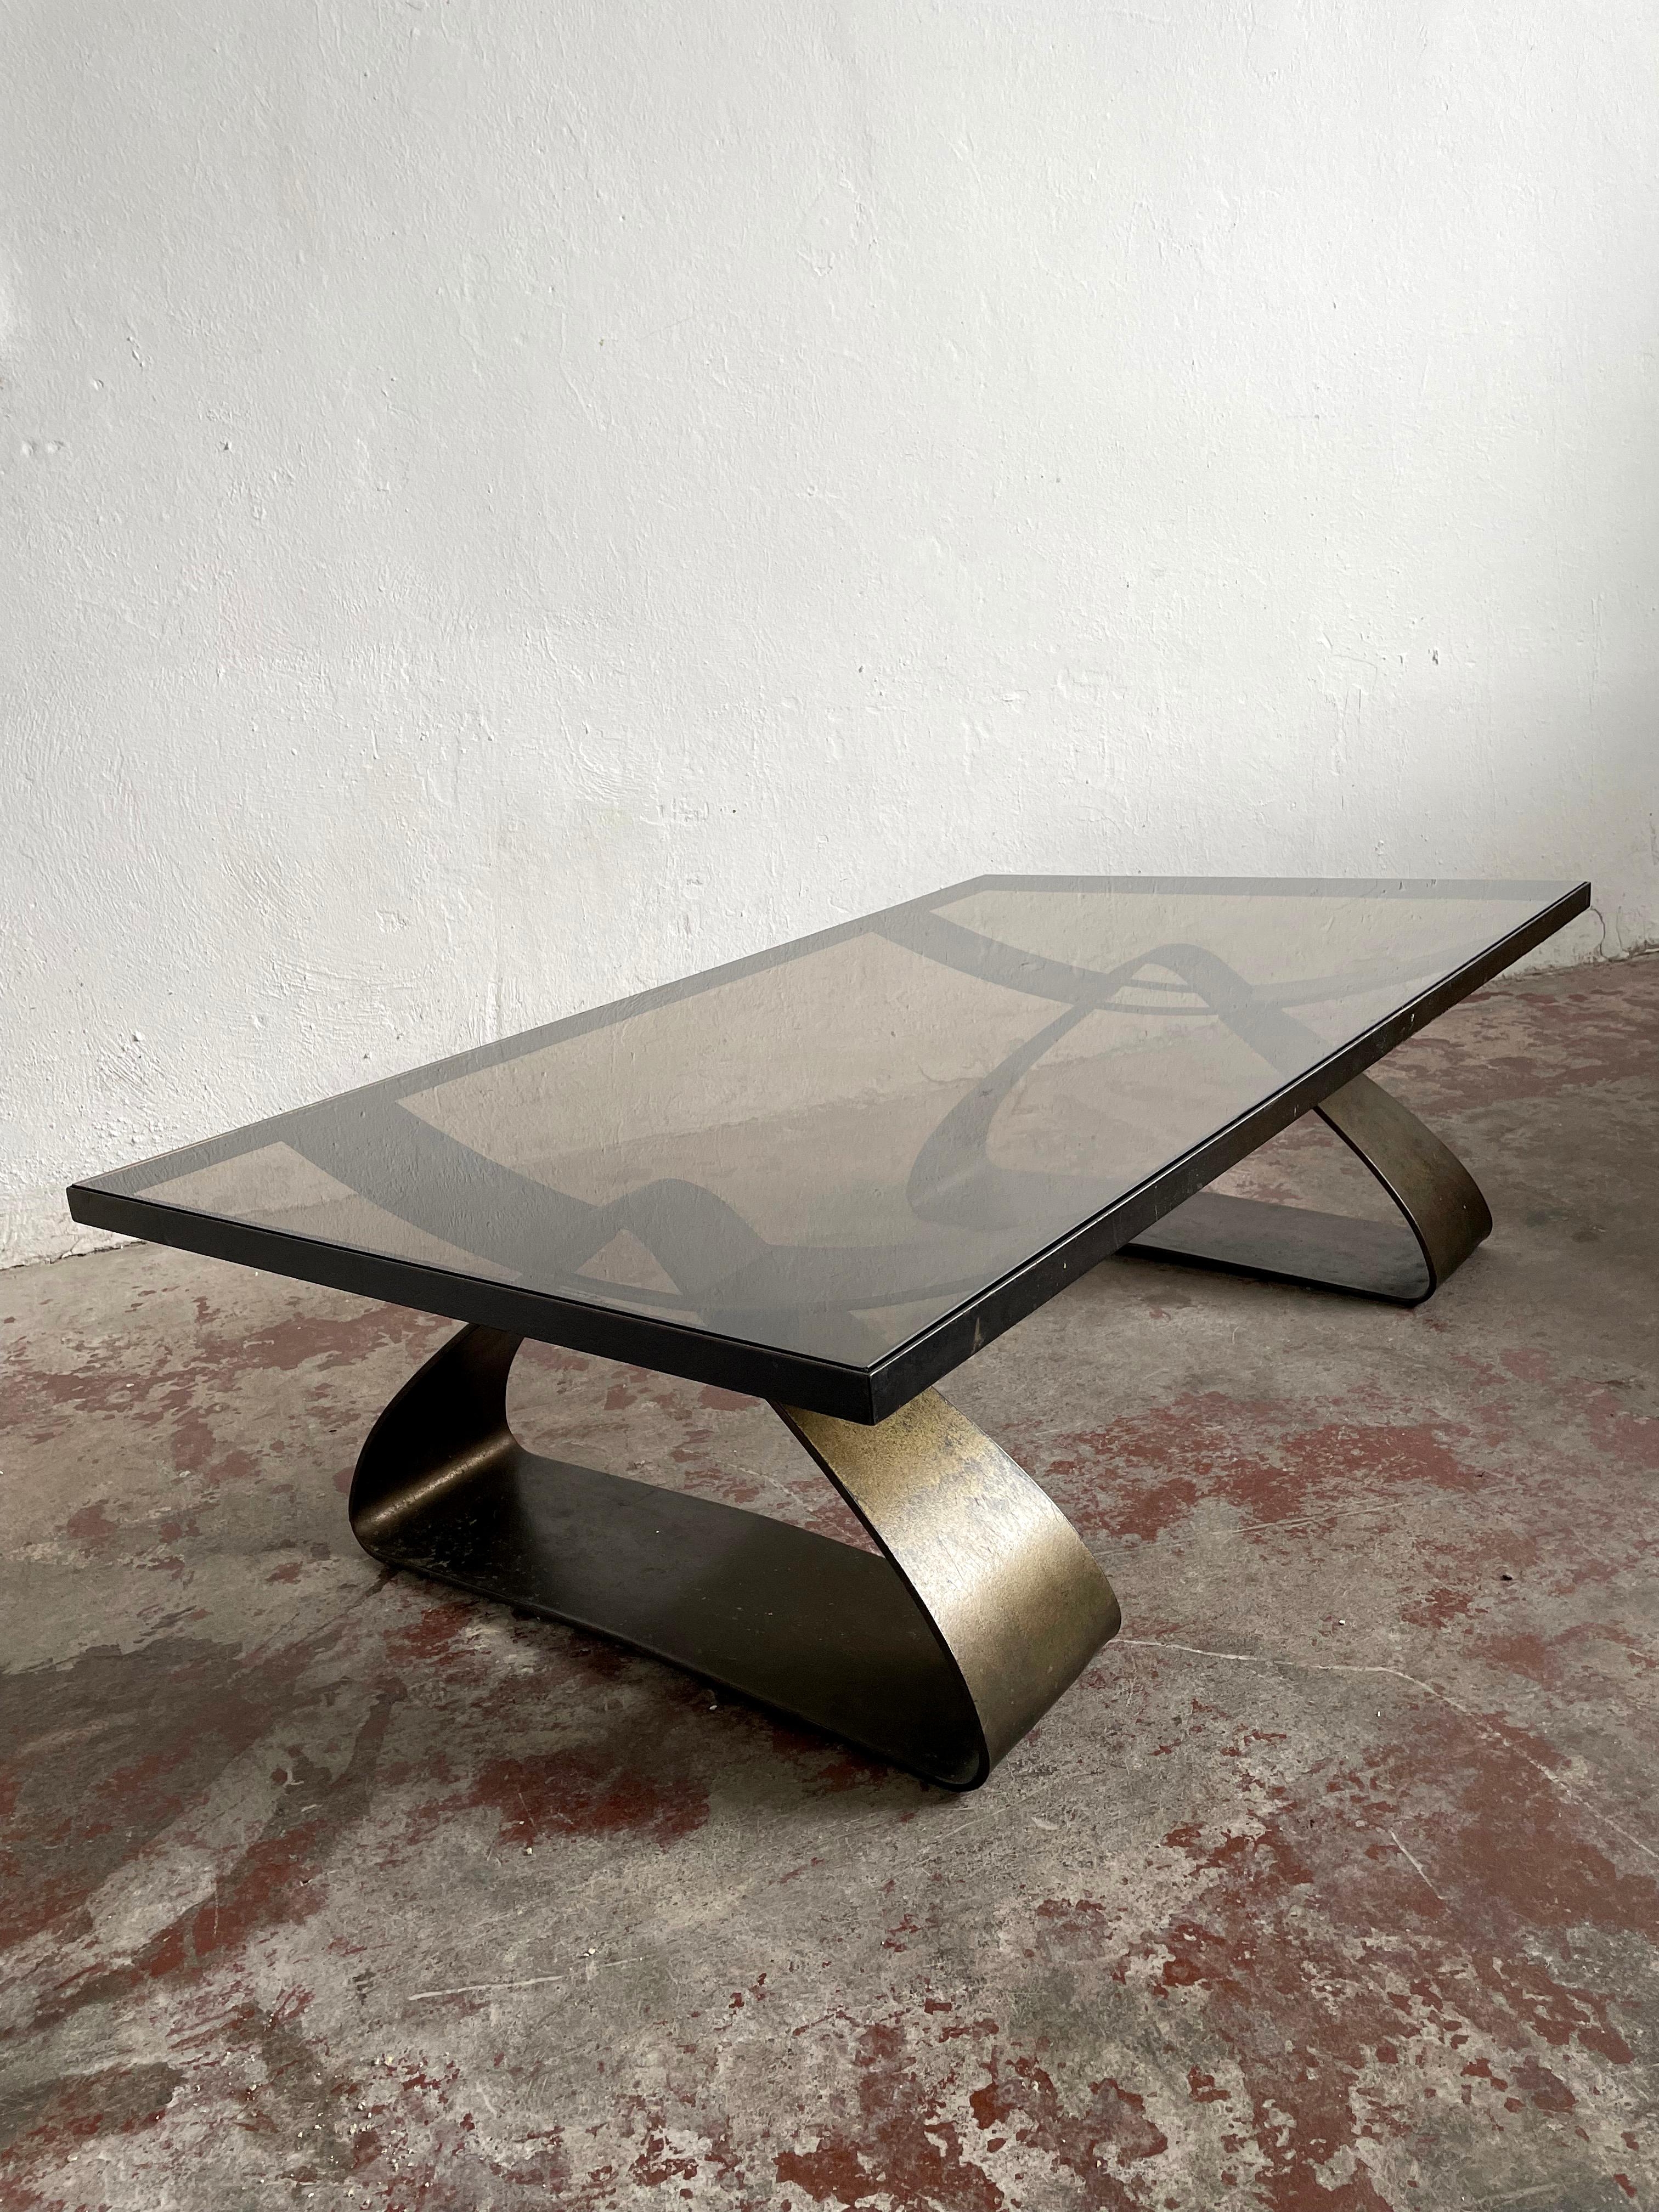 Rare Brutalist mid century large size centre table featuring smoked glass tabletop and very heavy iron frame and legs with a nice patina finish

Unknown provenance

This is a vintage piece and some normal signs of cosmetic wear can be expected.